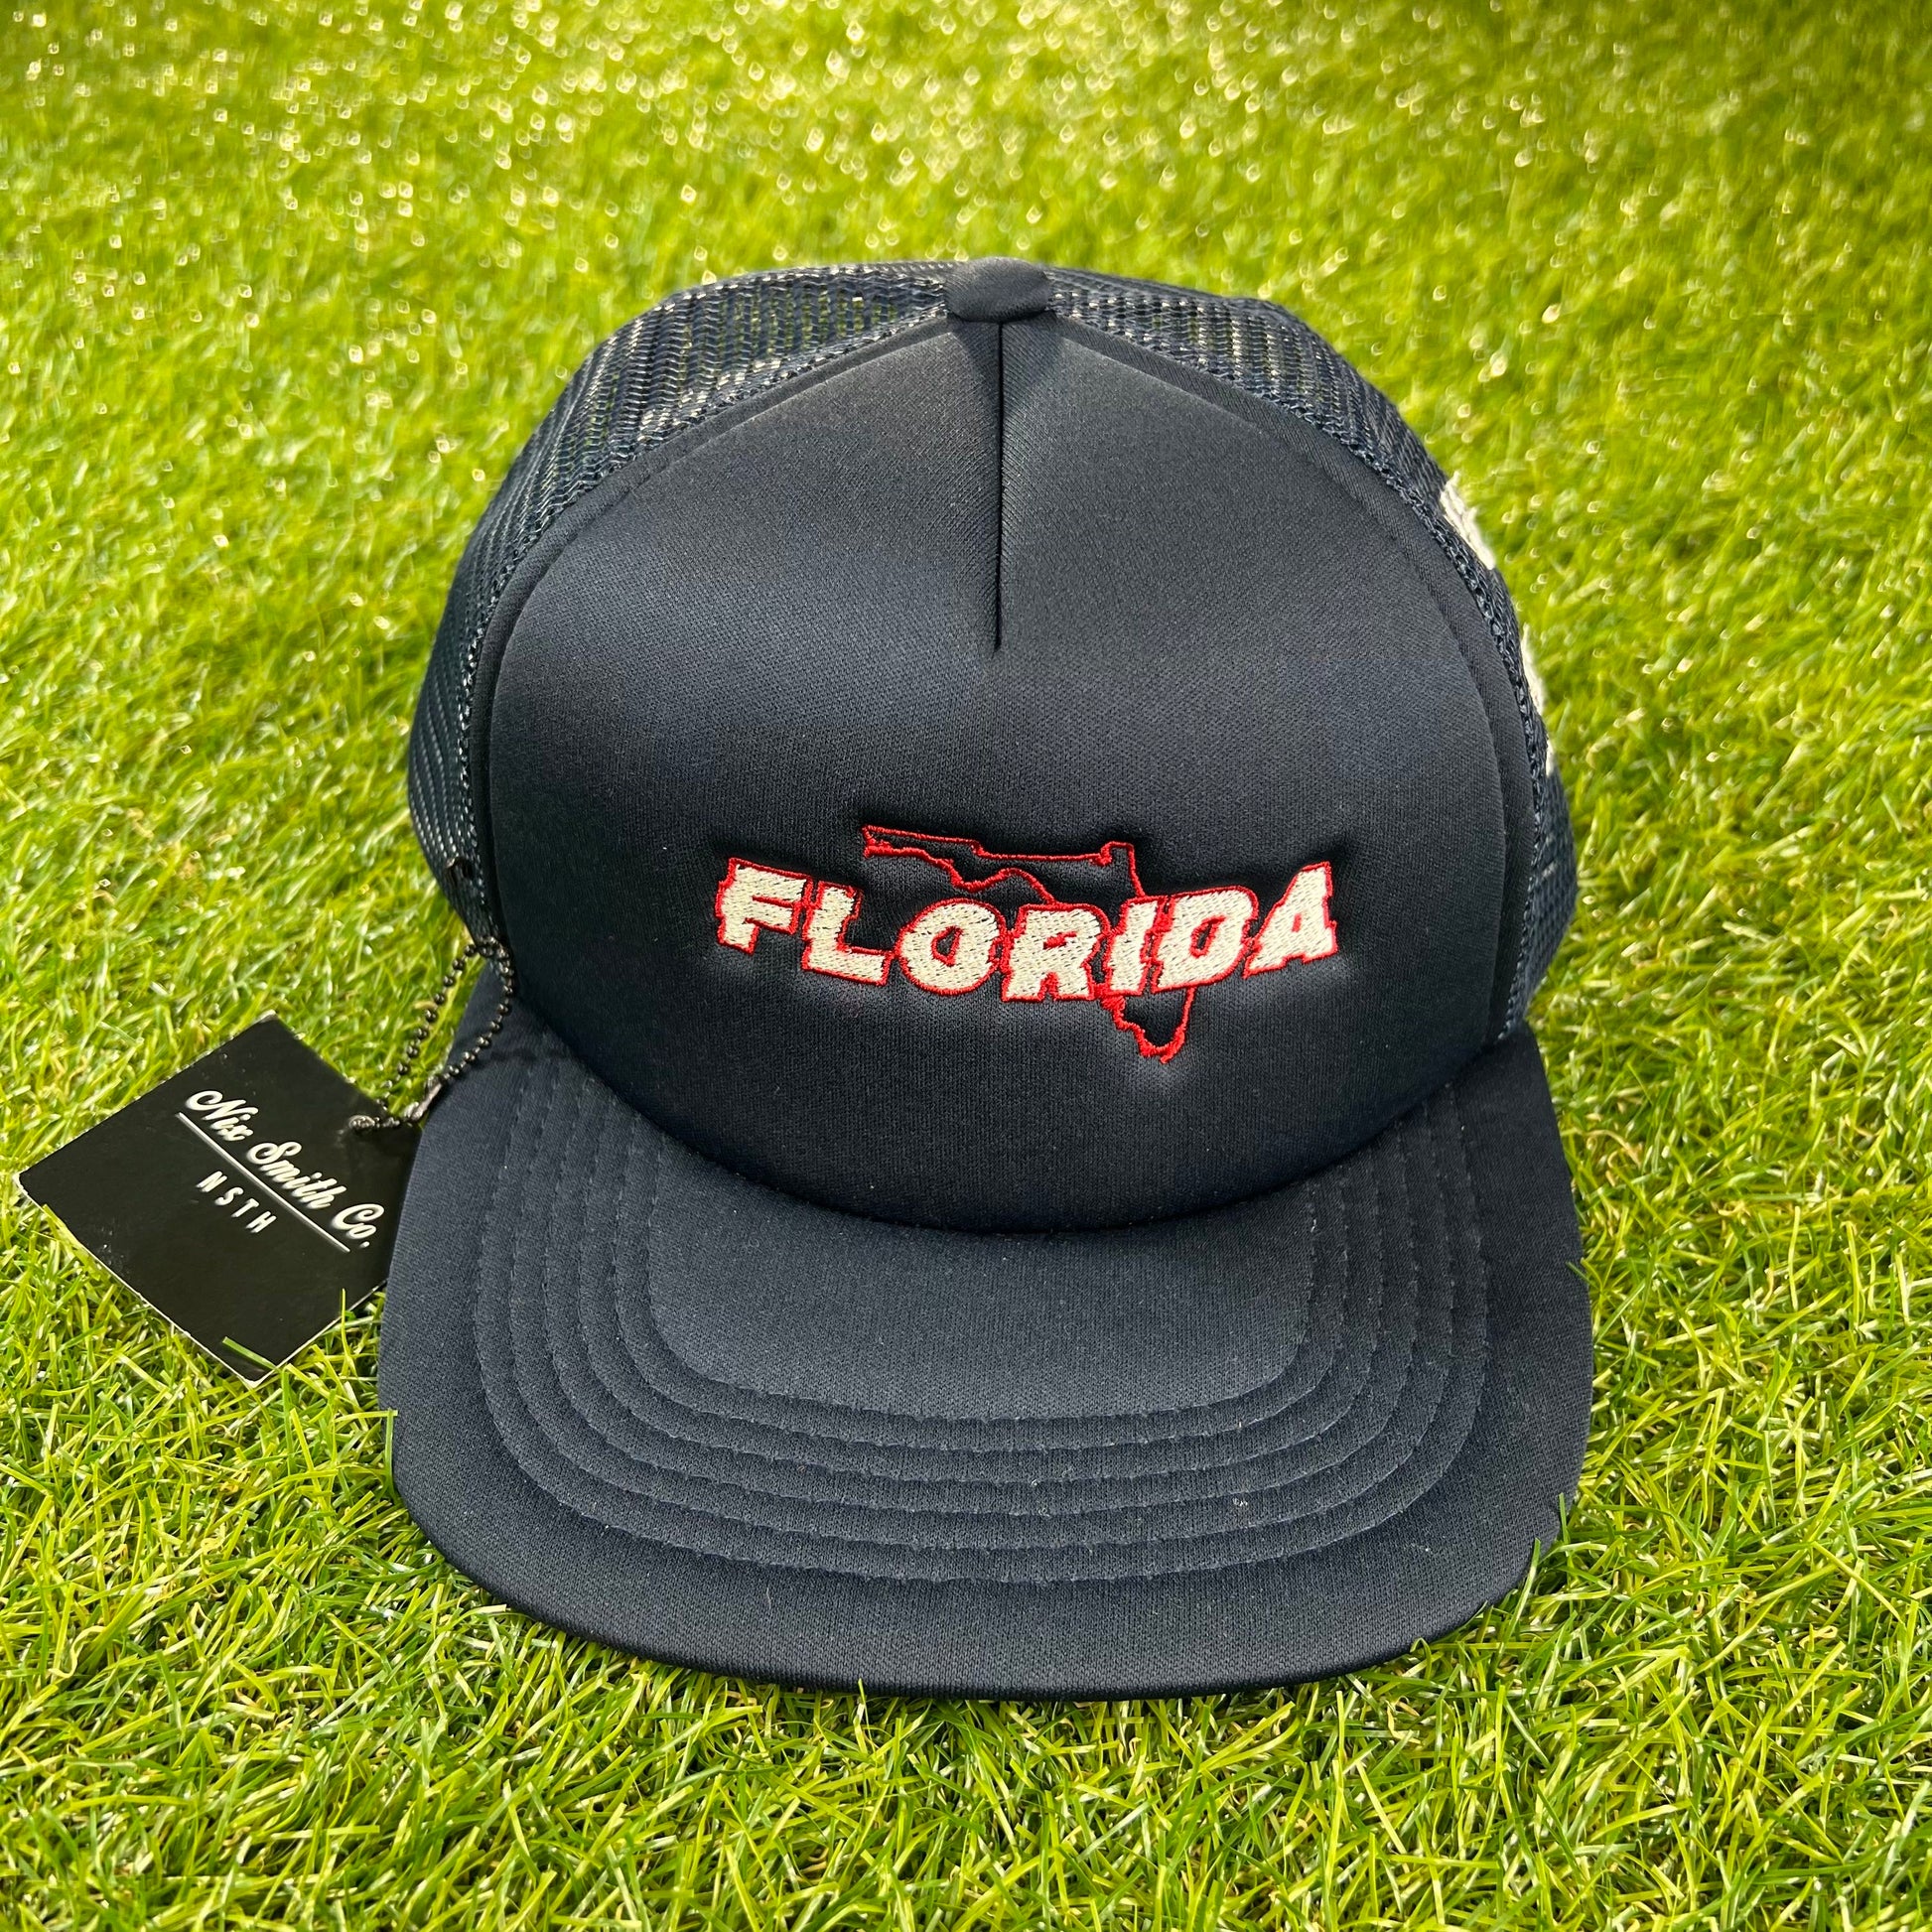 Florida Hats, Hats, Black Hats, Trucker, Style, Snapback, Men, Boys, Teens, Gifts, Hat, Nix Smith Co, Urban, Wmns, Girls, Red and White Hat, Black and Red Hat, Florida, 